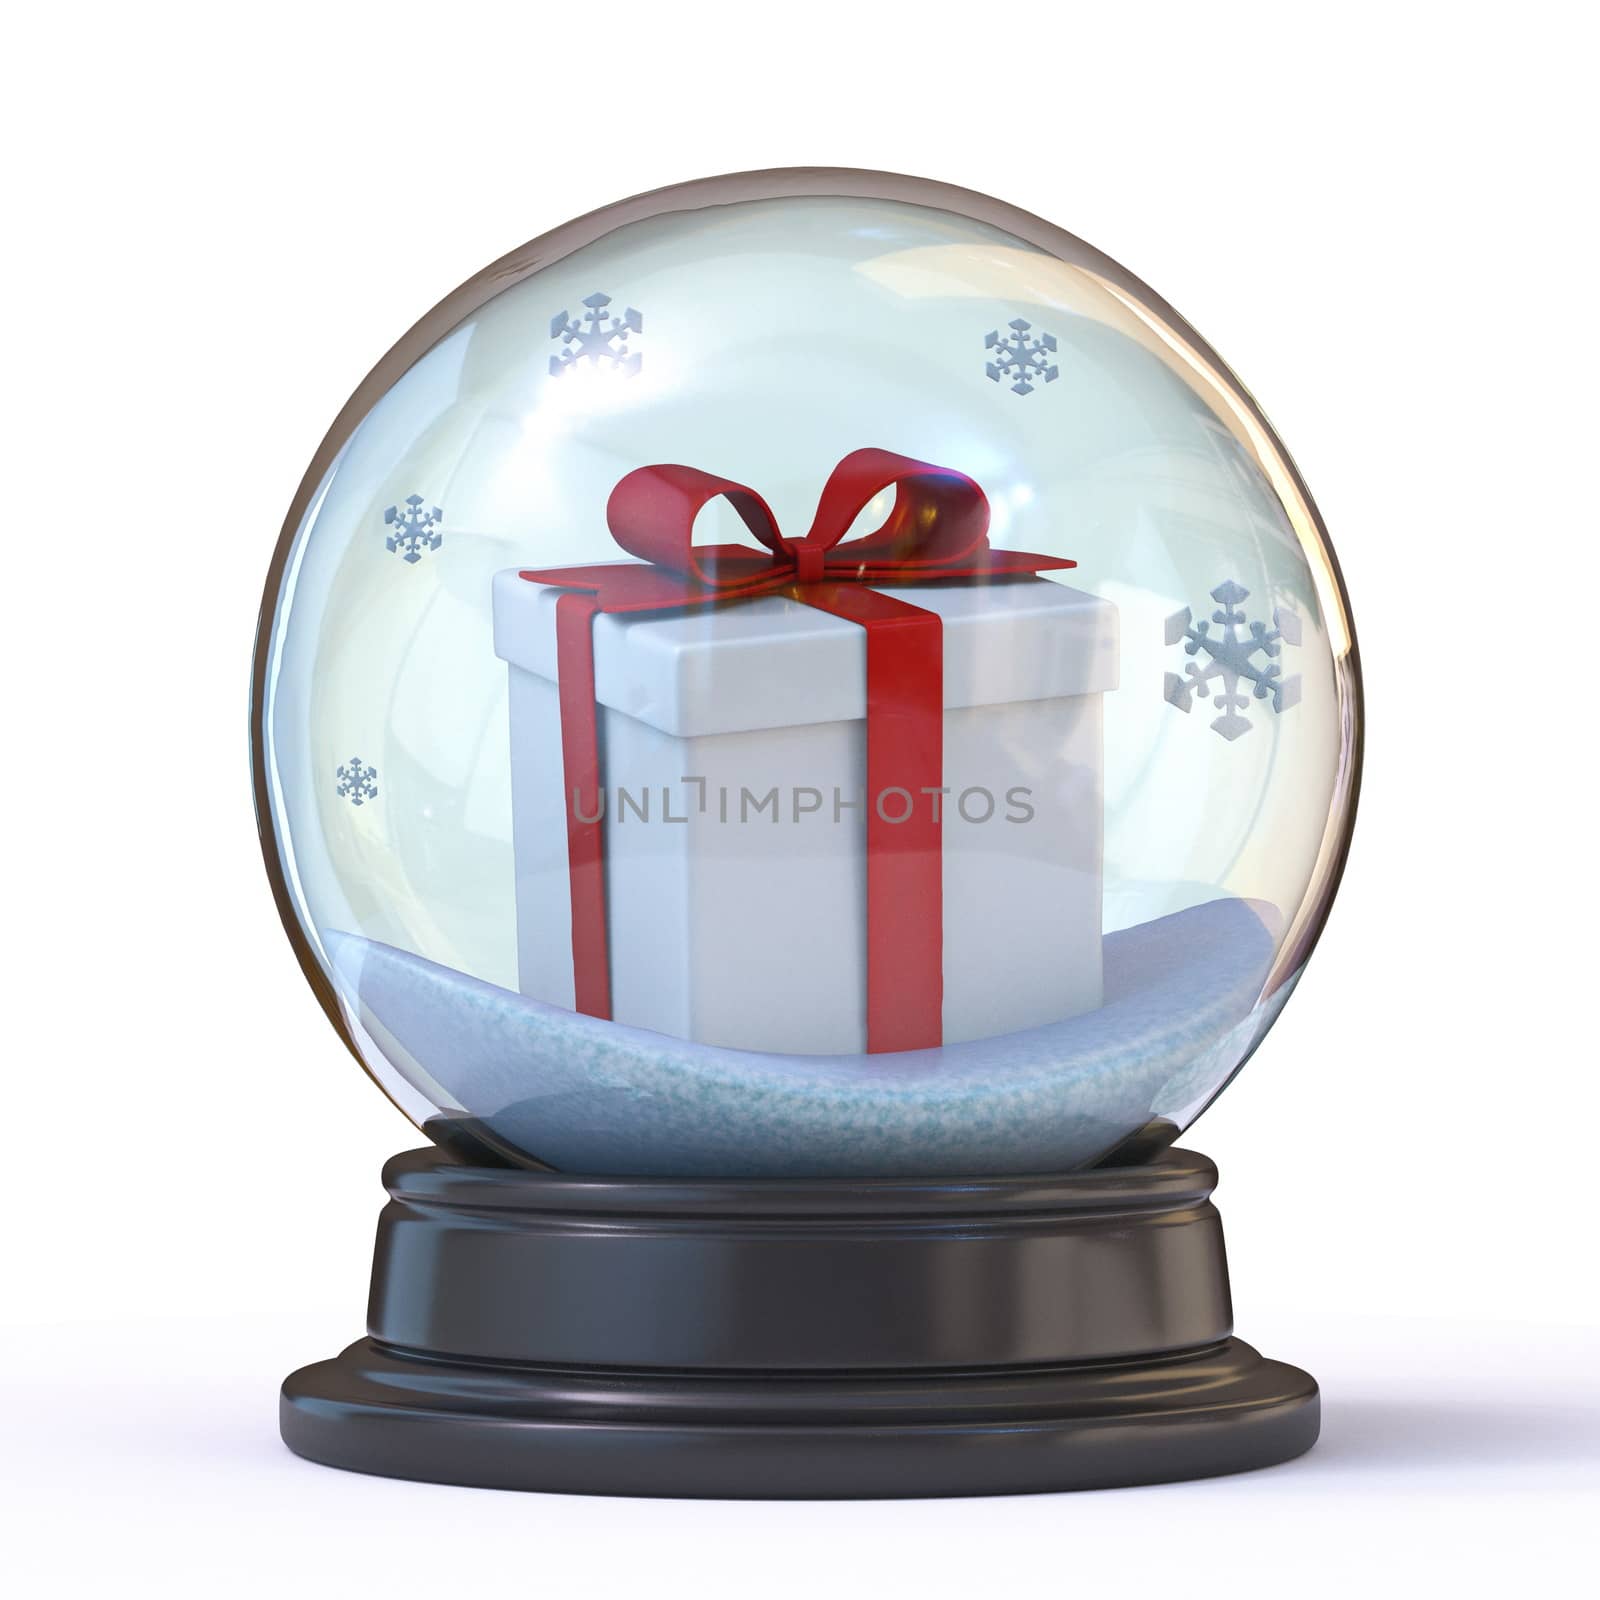 Snow ball with gift box 3D render illustration isolated on white background